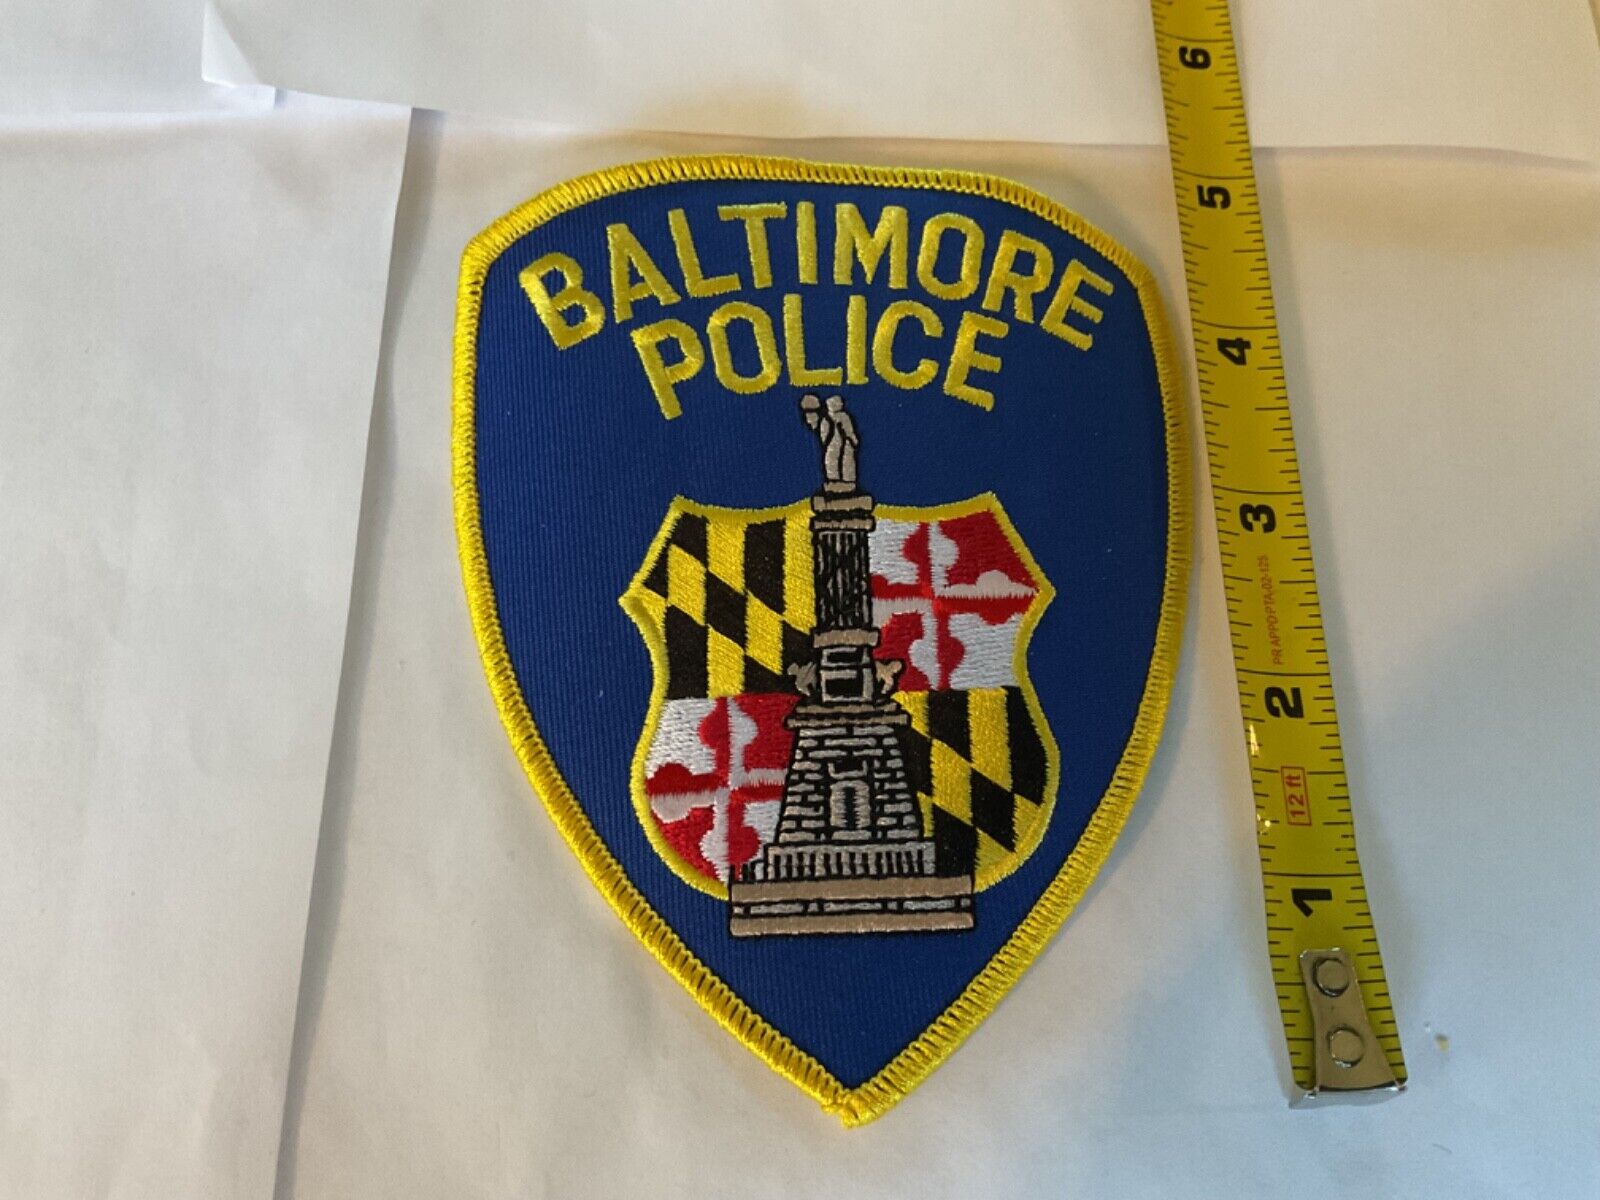 Baltimore Police Maryland collectible patches New Current Style Full Size.